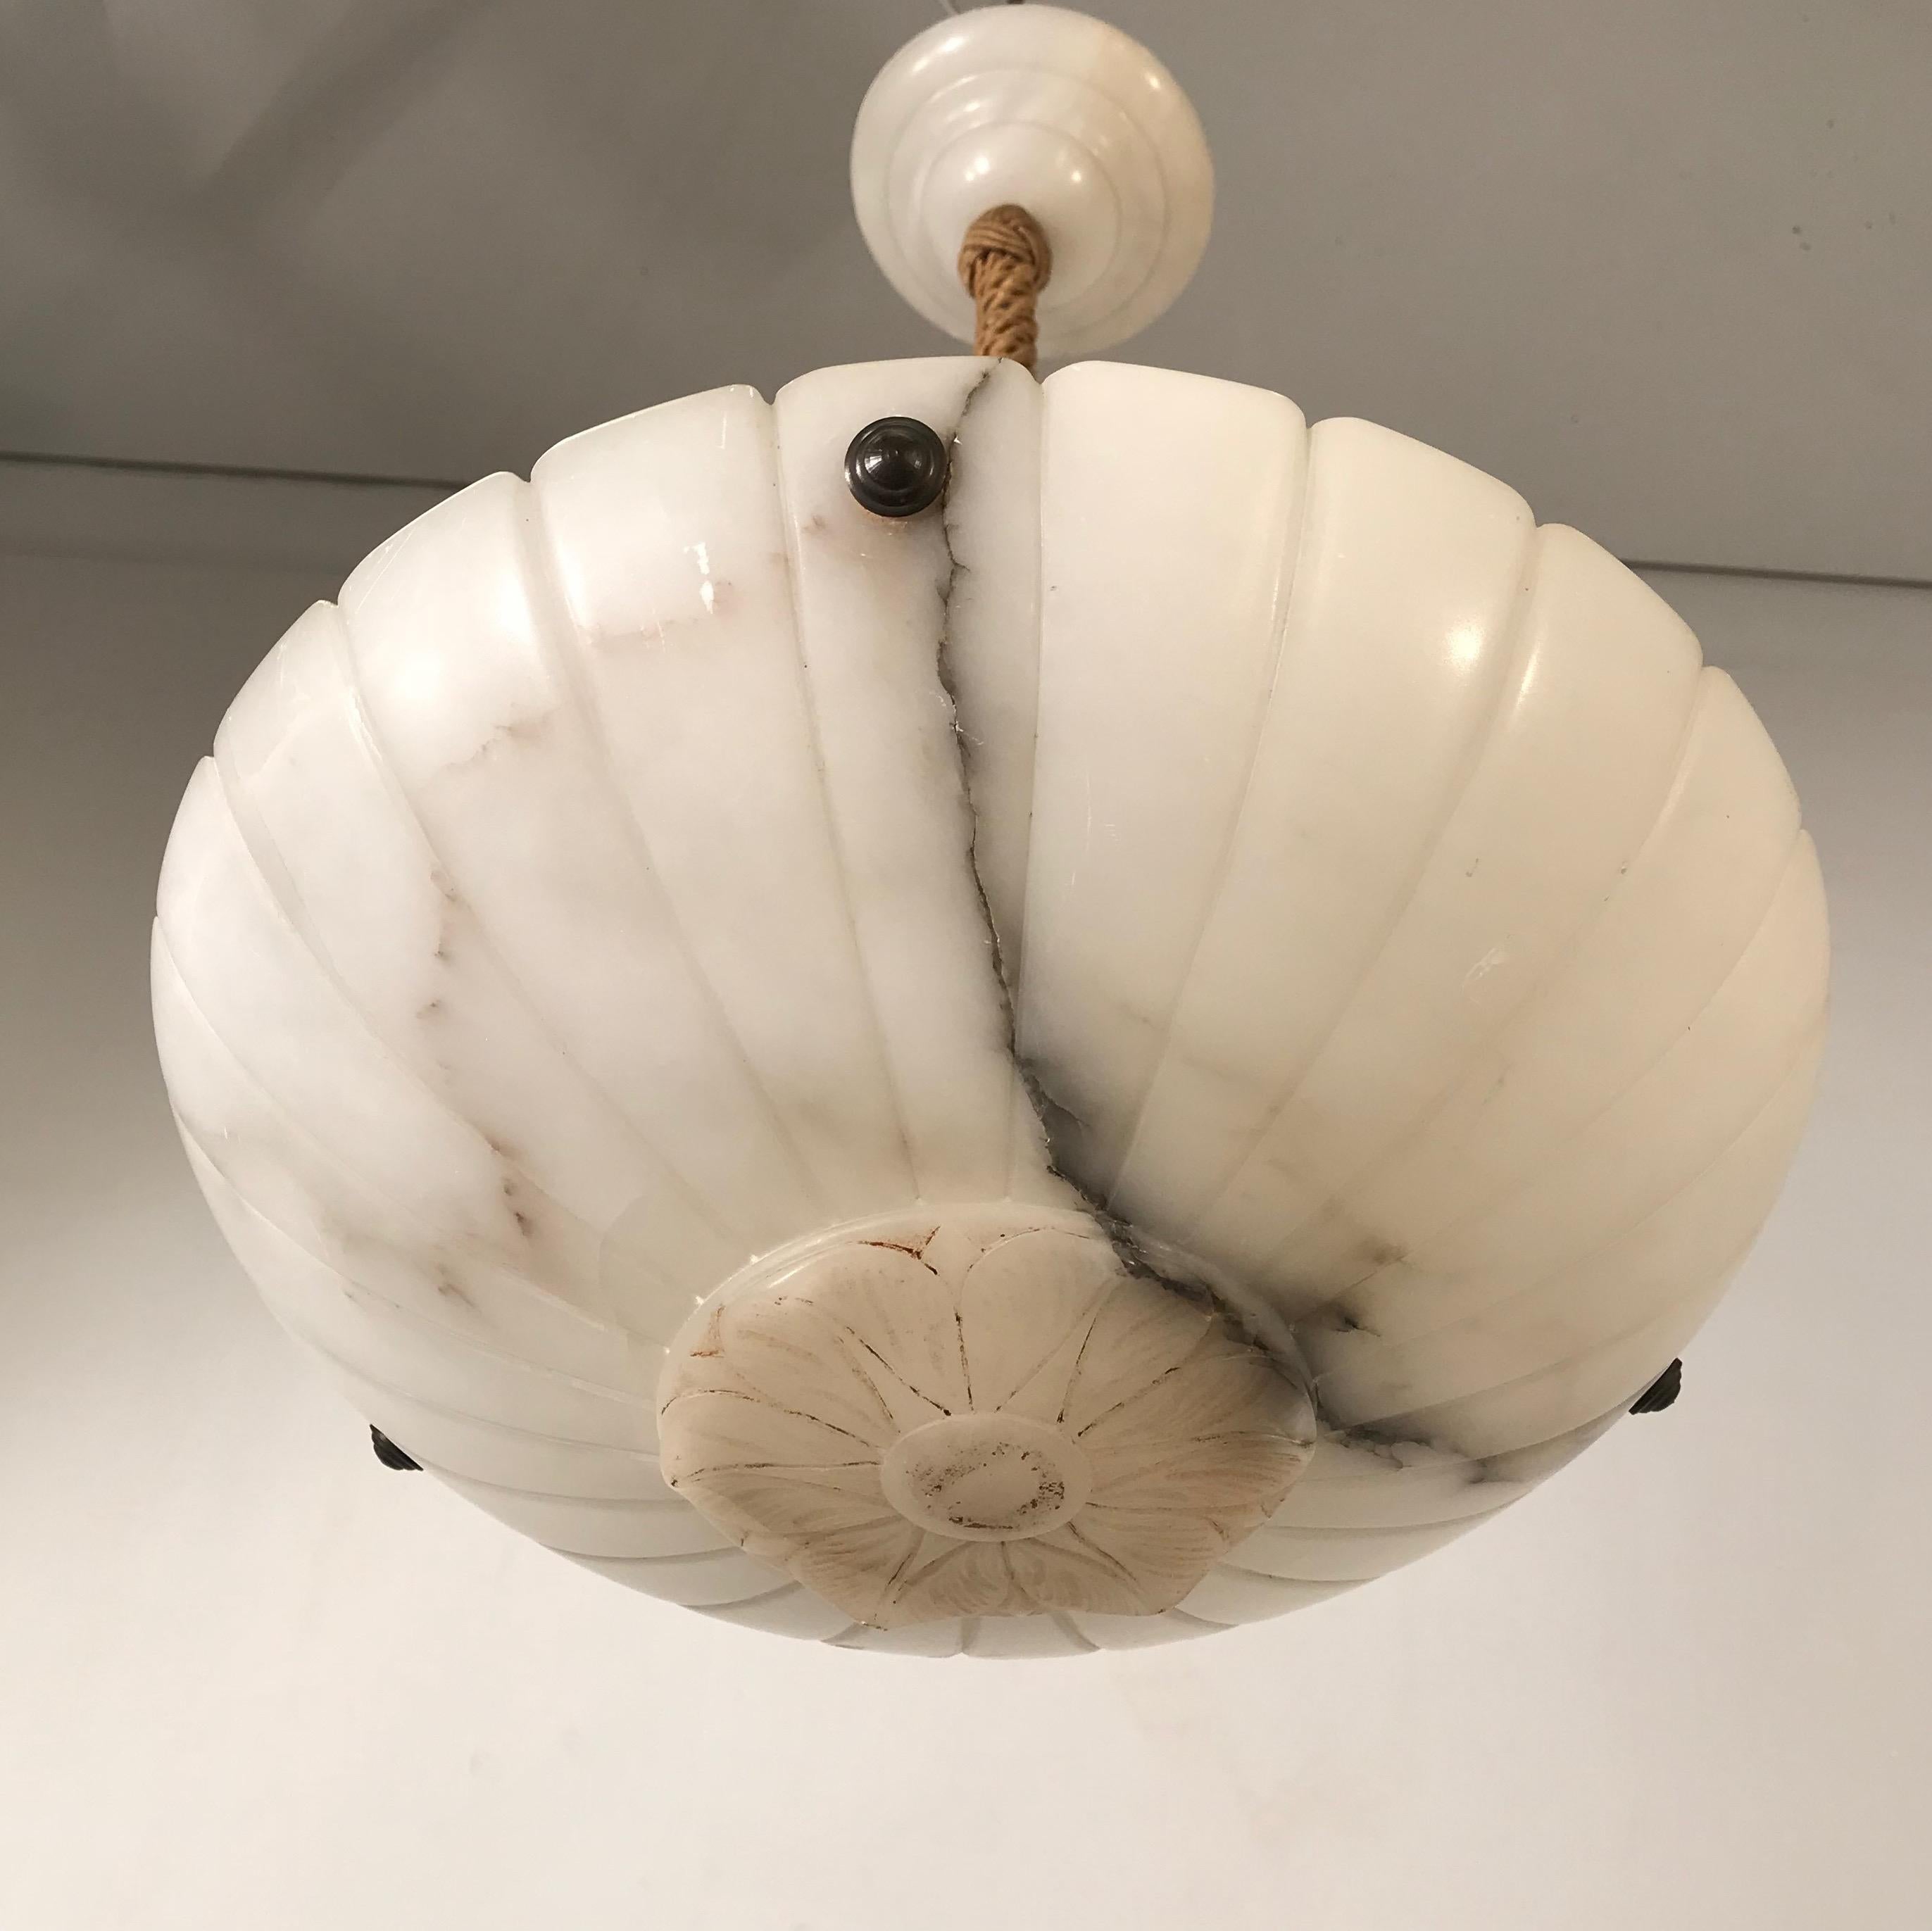 Great shape and small size alabaster pendant with original alabaster canopy & rope.

If you are looking for a small, elegant and great condition alabaster pendant then this classical design light fixture could be perfect for you. This hand-carved